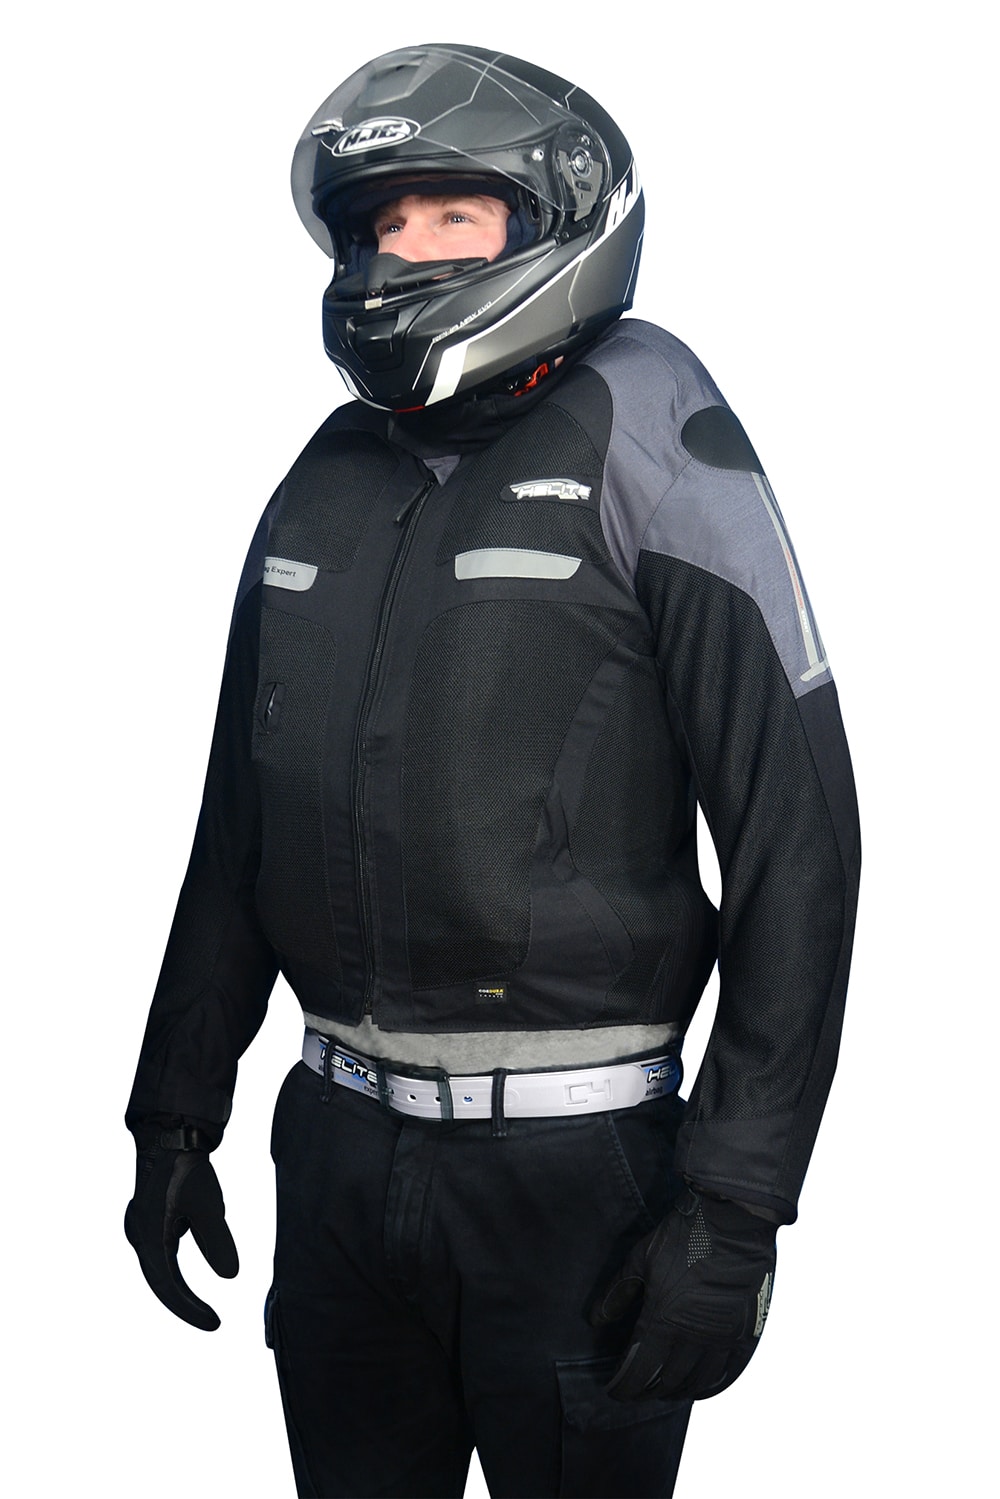 biker being safe by wearing the vented motorcycle jacket front view inflated